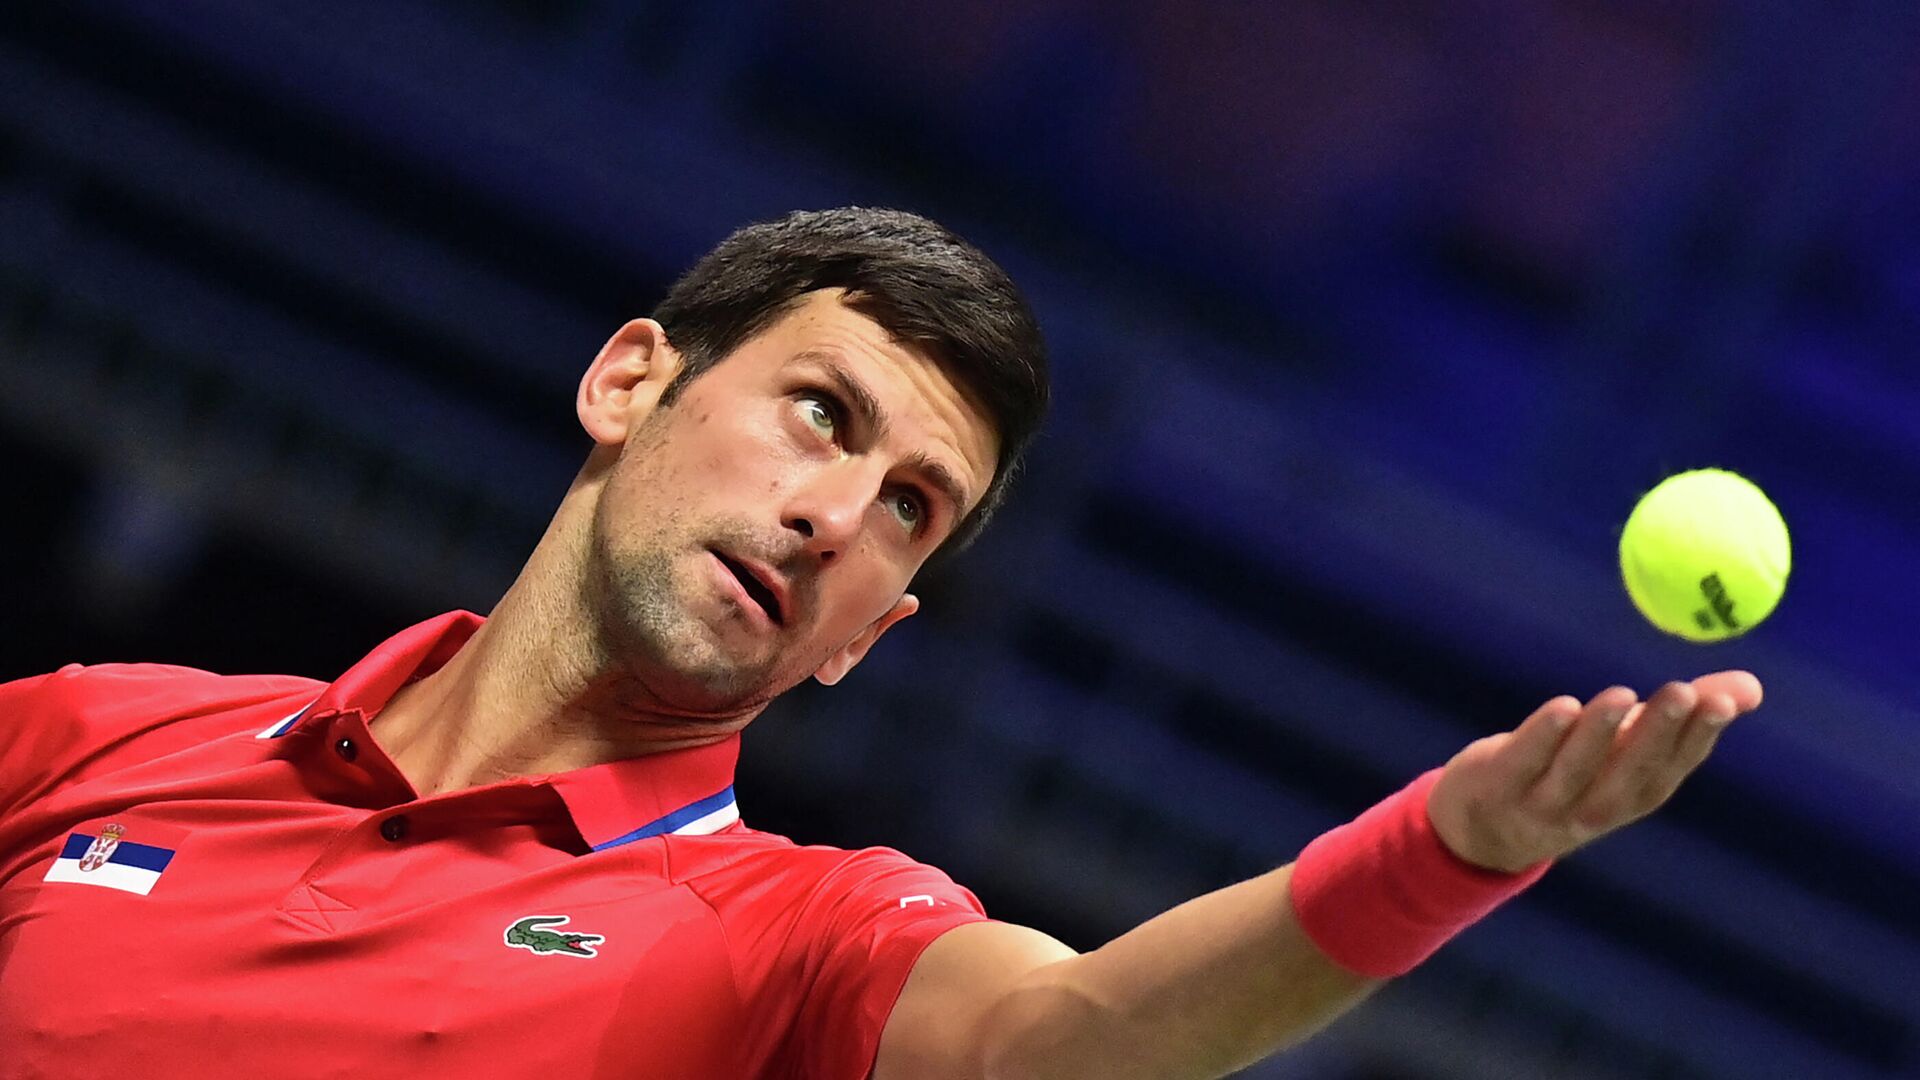 Serbia's Novak Djokovic serves the ball to Germany's Jan-Lennard Struff (not pictured) during the men's singles group stage match between Serbia and Germany of the Davis Cup tennis tournament in Innsbruck, Austria, on November 27, 2021 - Sputnik International, 1920, 17.01.2022